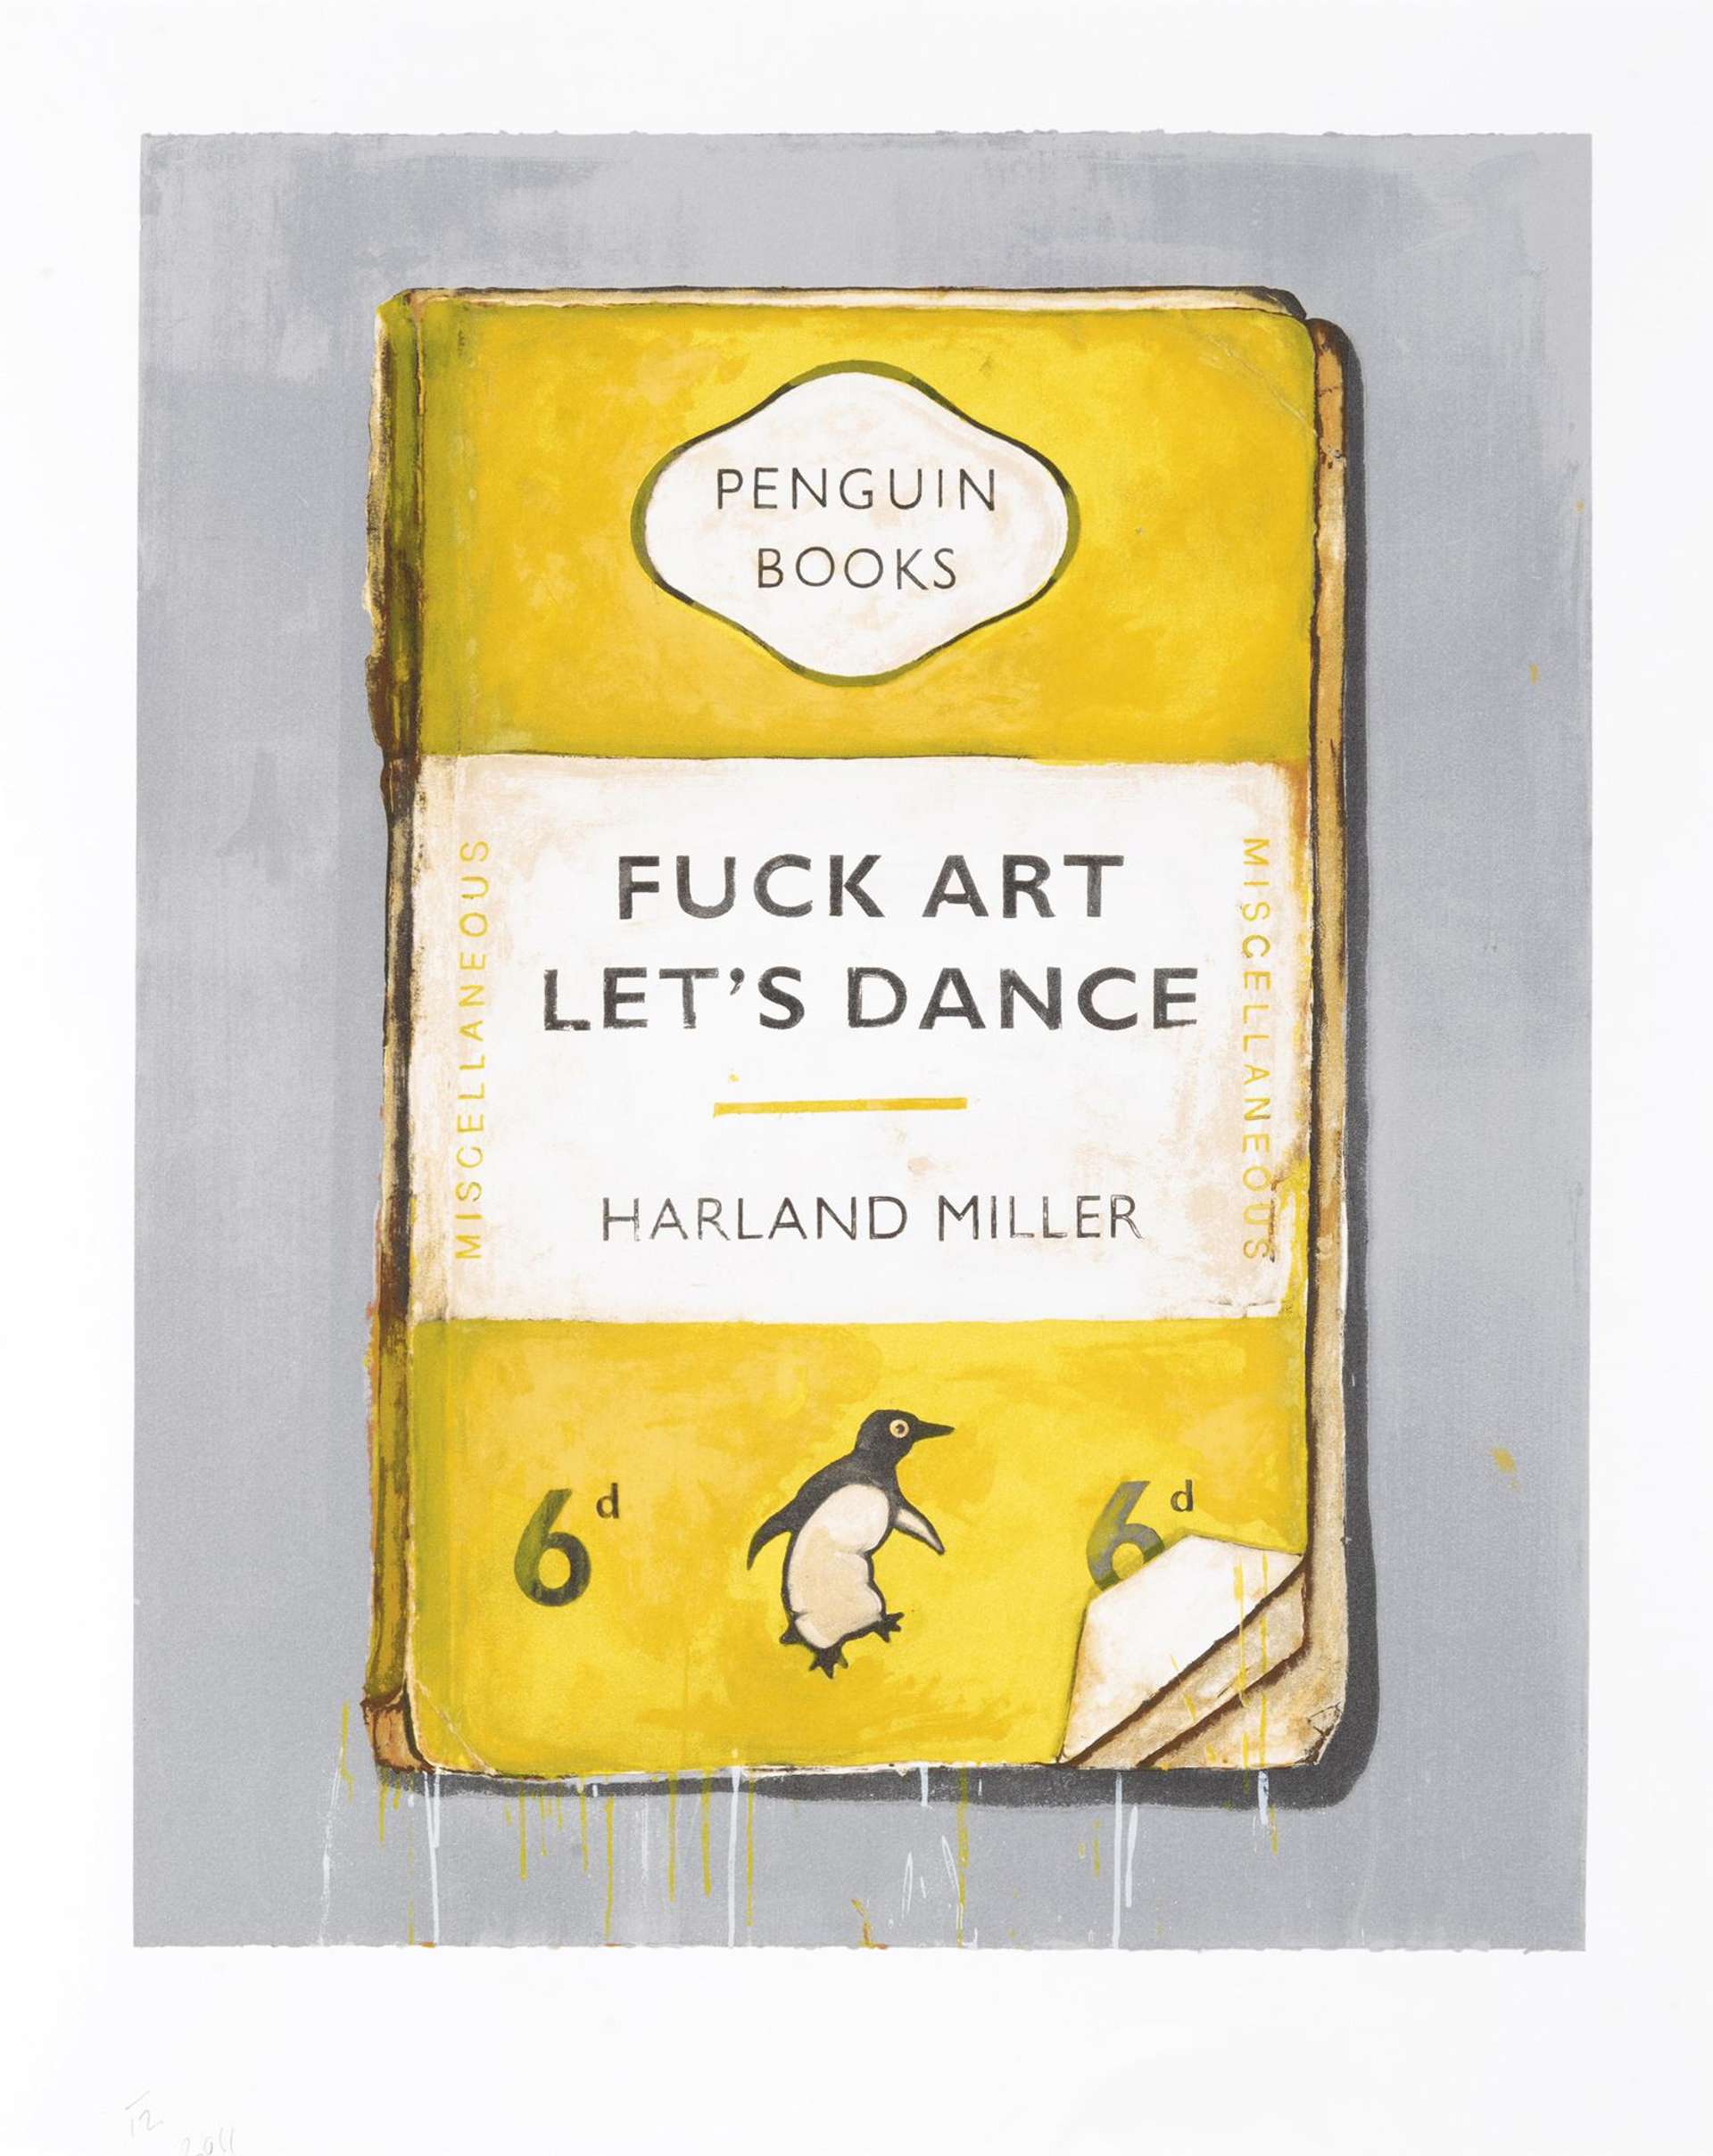 A yellow and white paperback styled as a Penguin Classic, with the text ‘Fuck Art Let’s Dance’ as the book's title and ‘Harland Miller’ as the book’s author.